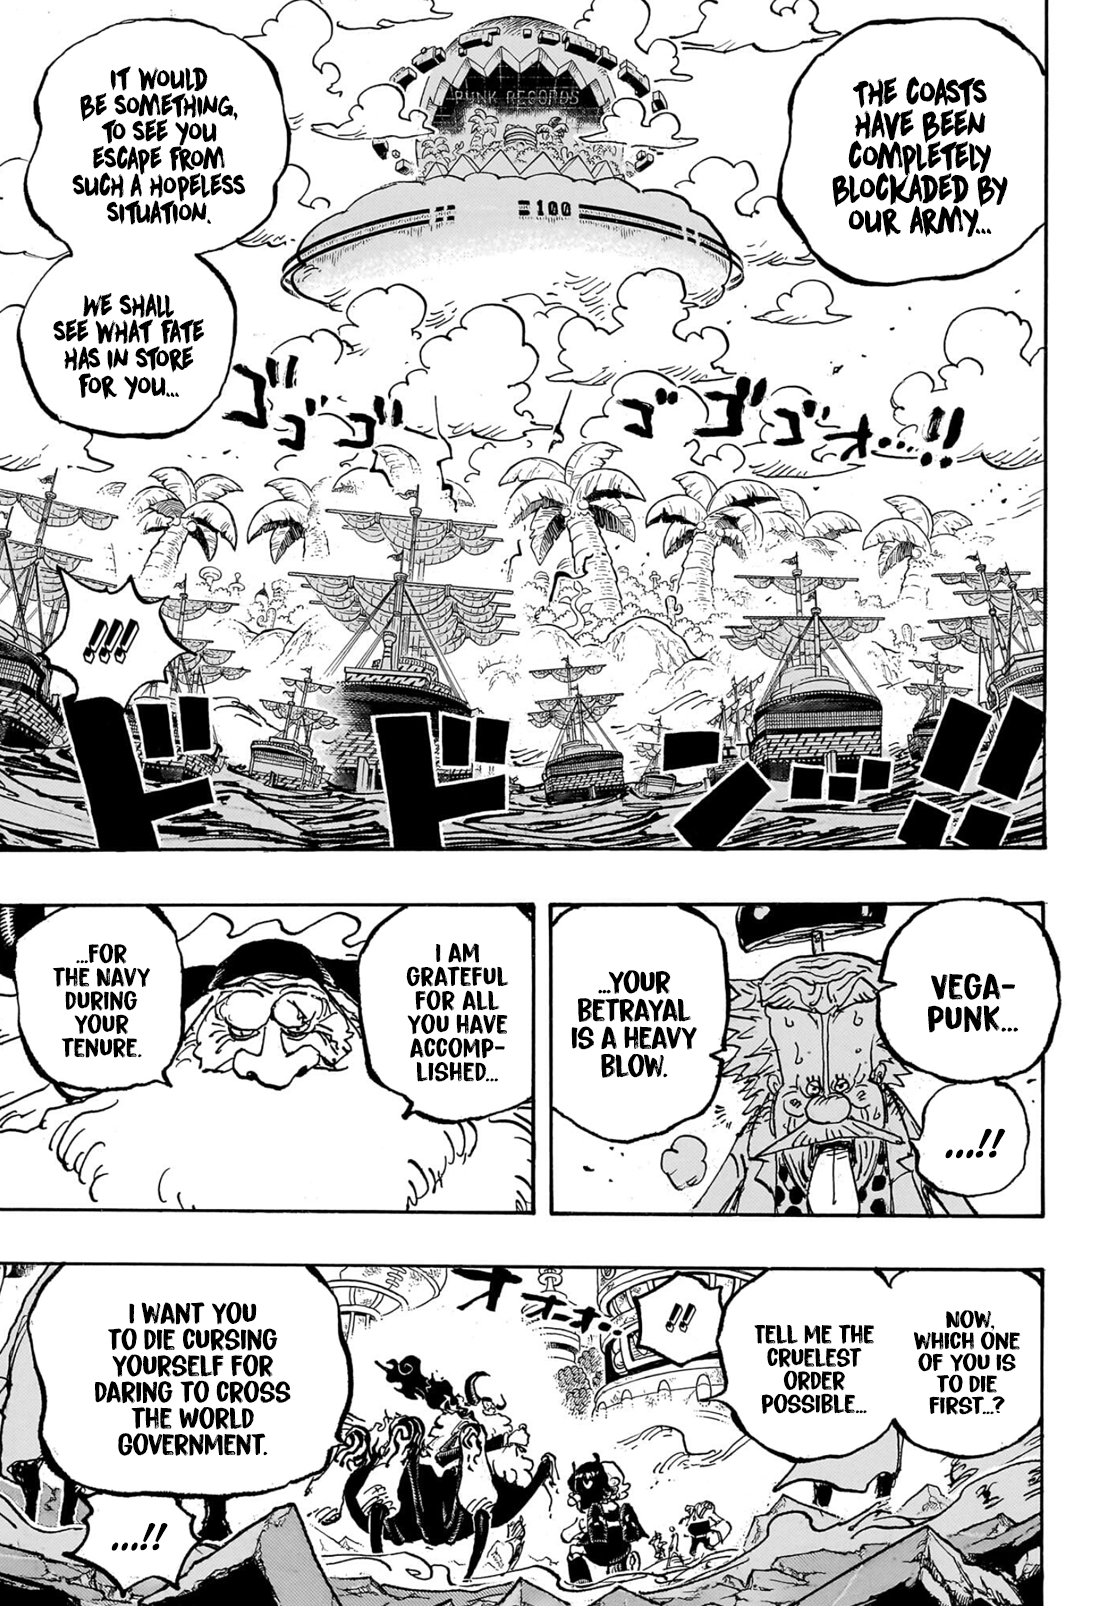 One Piece Chapter 1025 Raw Scans, Spoilers, Release Date - Anime Troop